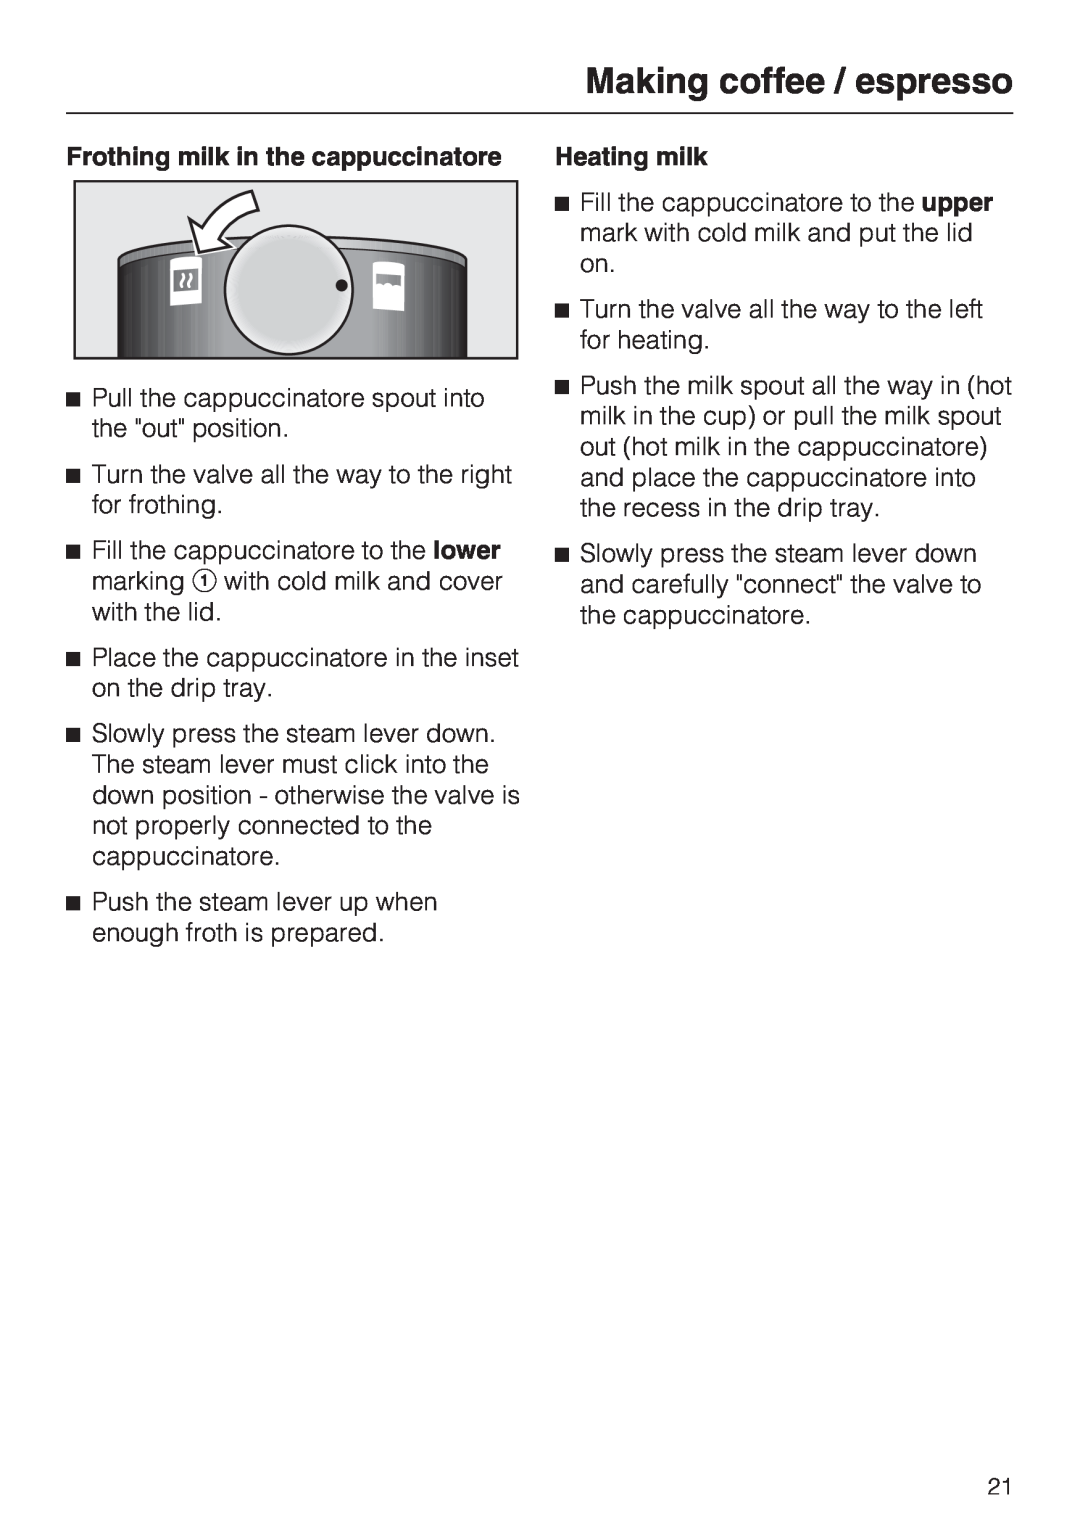 Miele CVA 2652 installation instructions Making coffee / espresso, Frothing milk in the cappuccinatore, Heating milk 